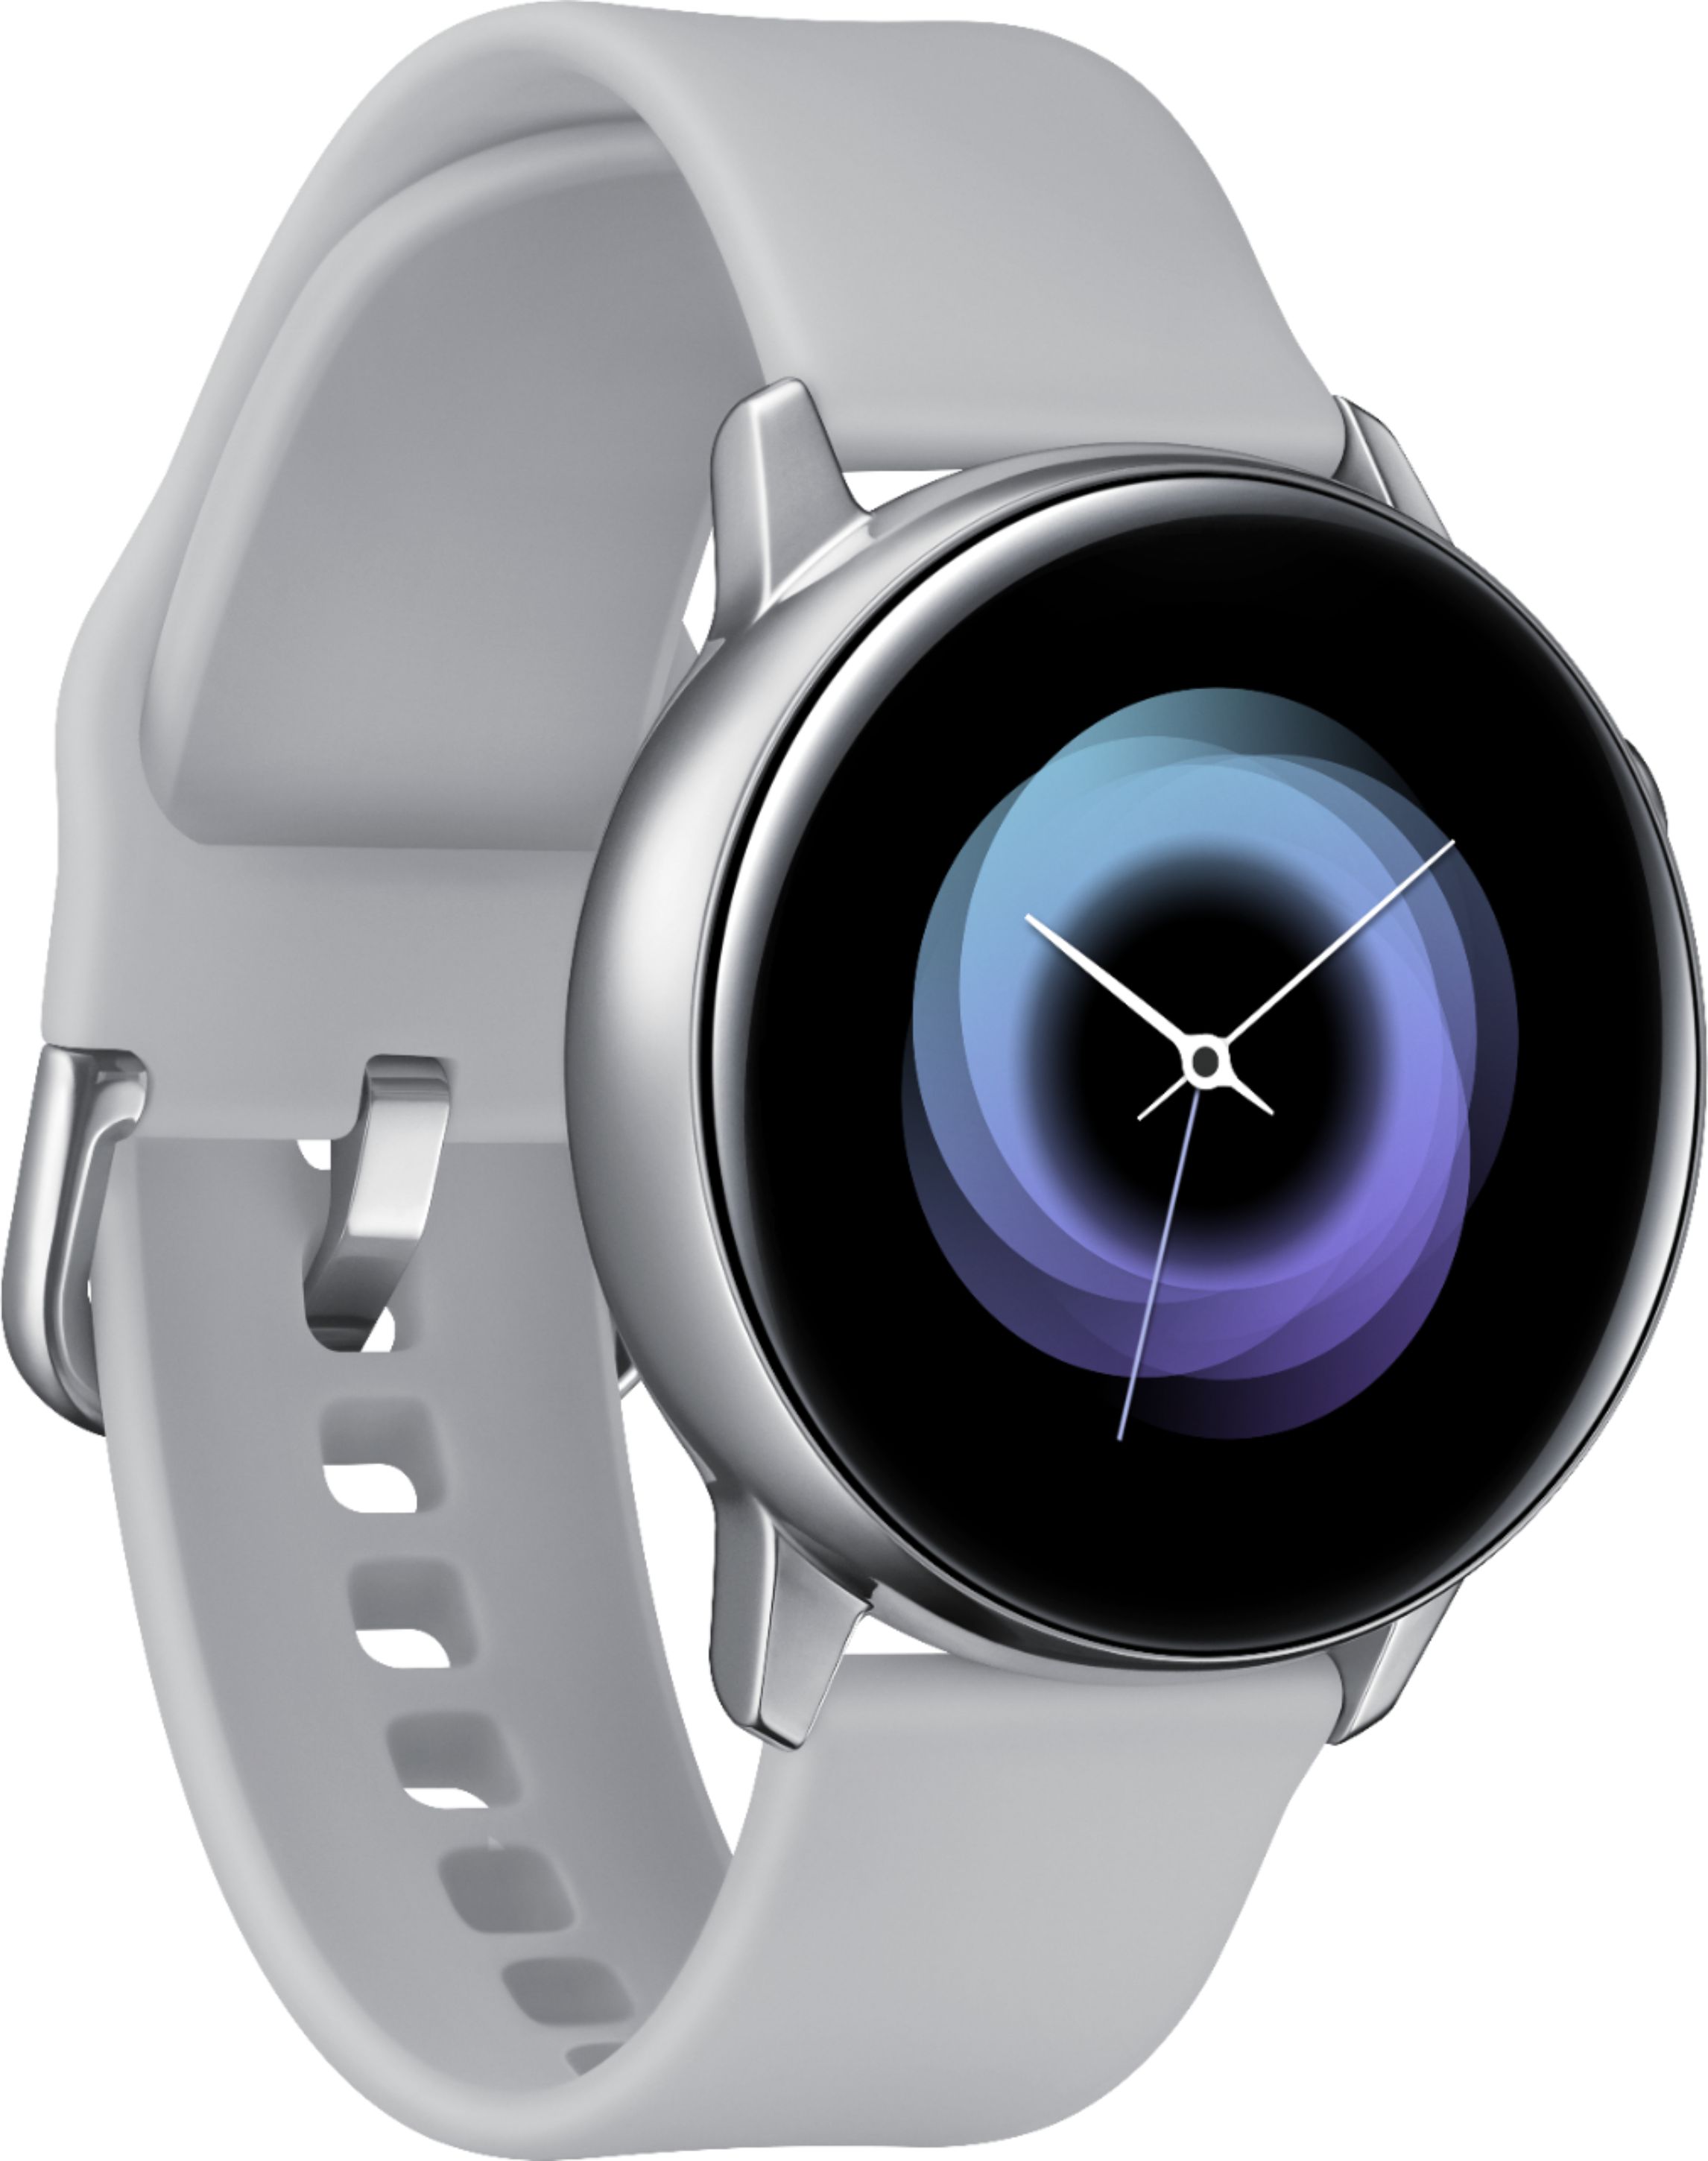 Angle View: Samsung - Geek Squad Certified Refurbished Galaxy Watch Active Smartwatch 40mm Aluminium - Silver